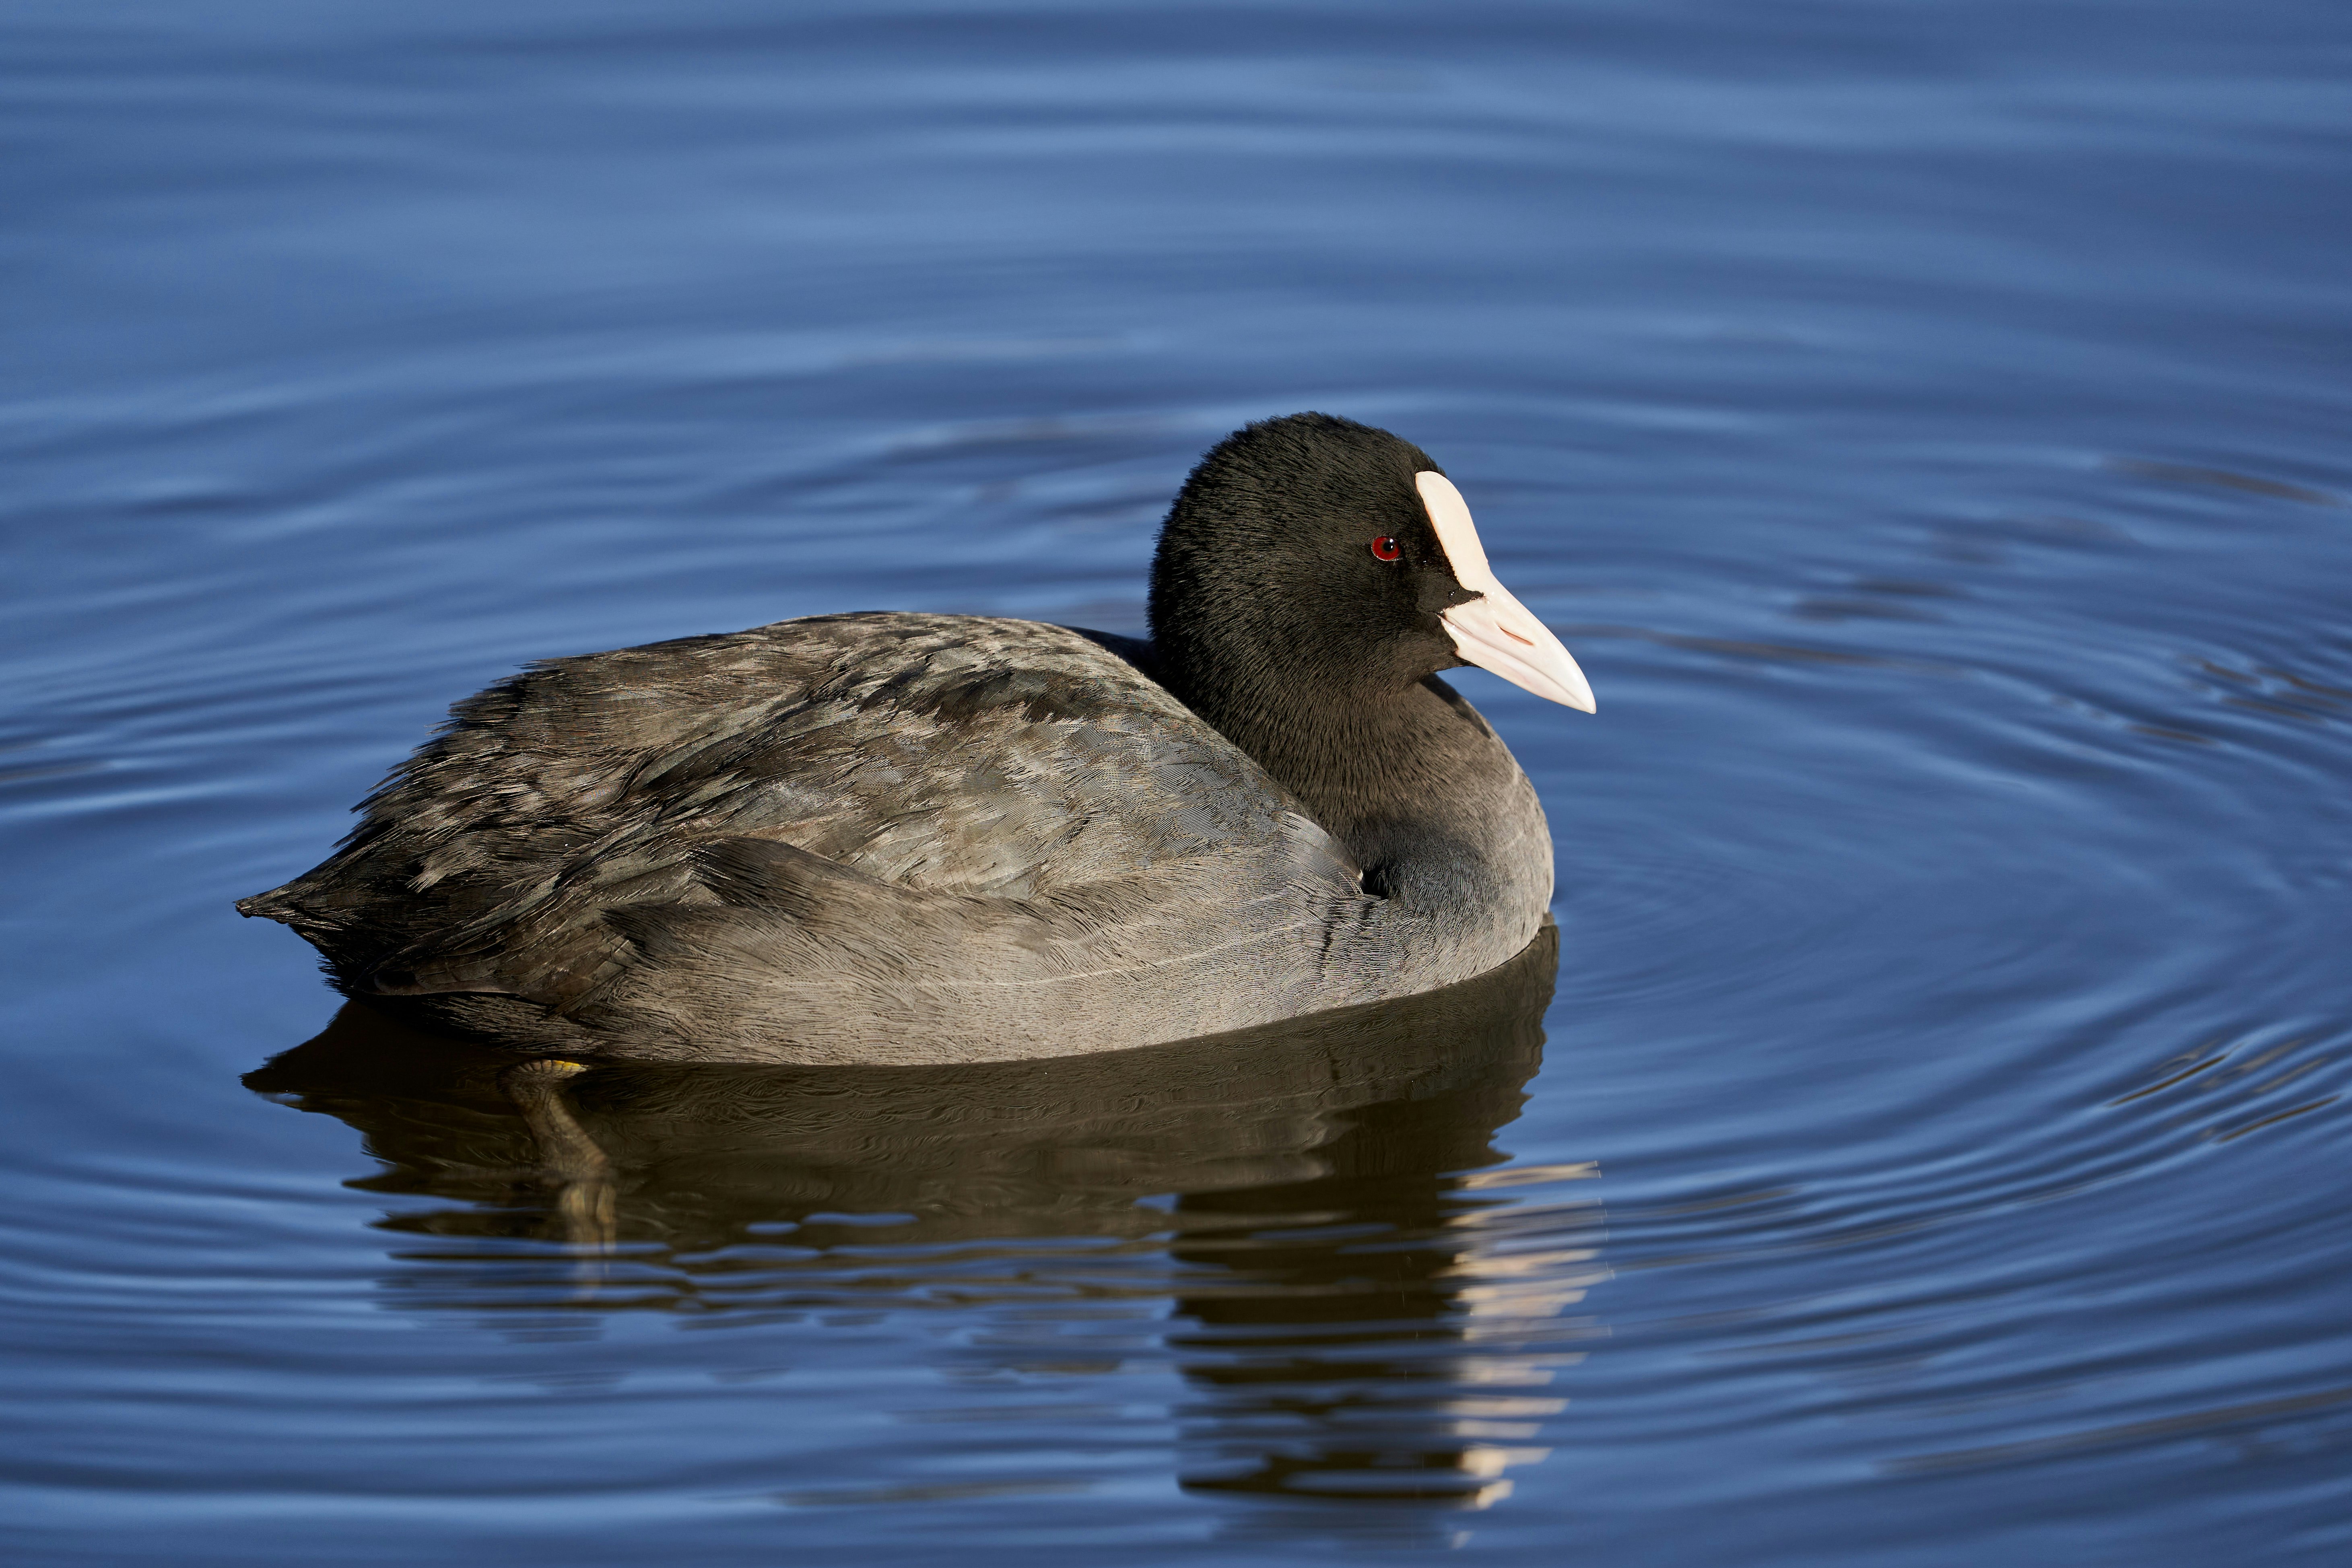 black and gray duck on water